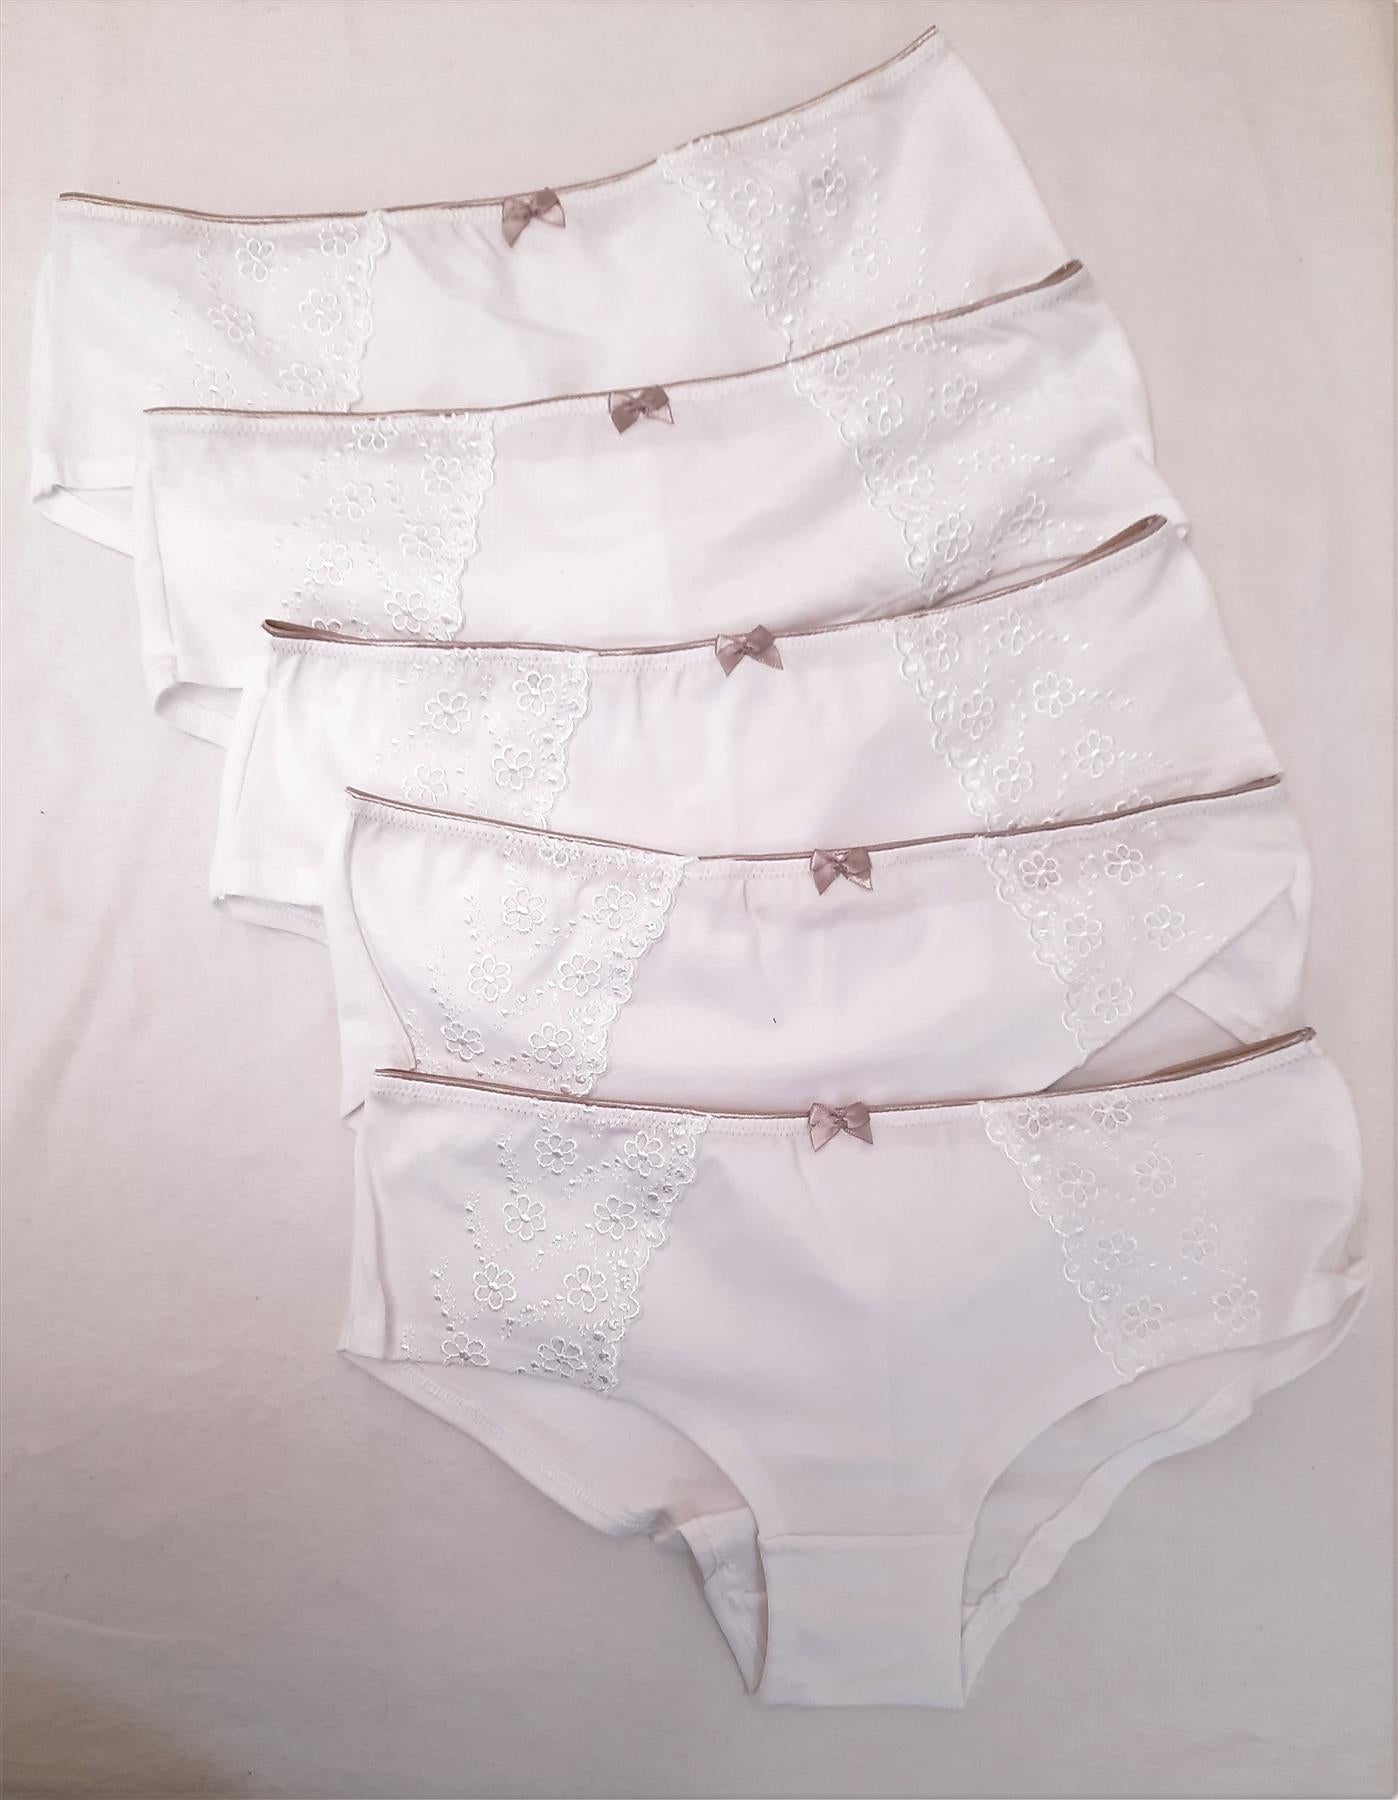 Embroidered Short Brief Knickers 5x Pairs